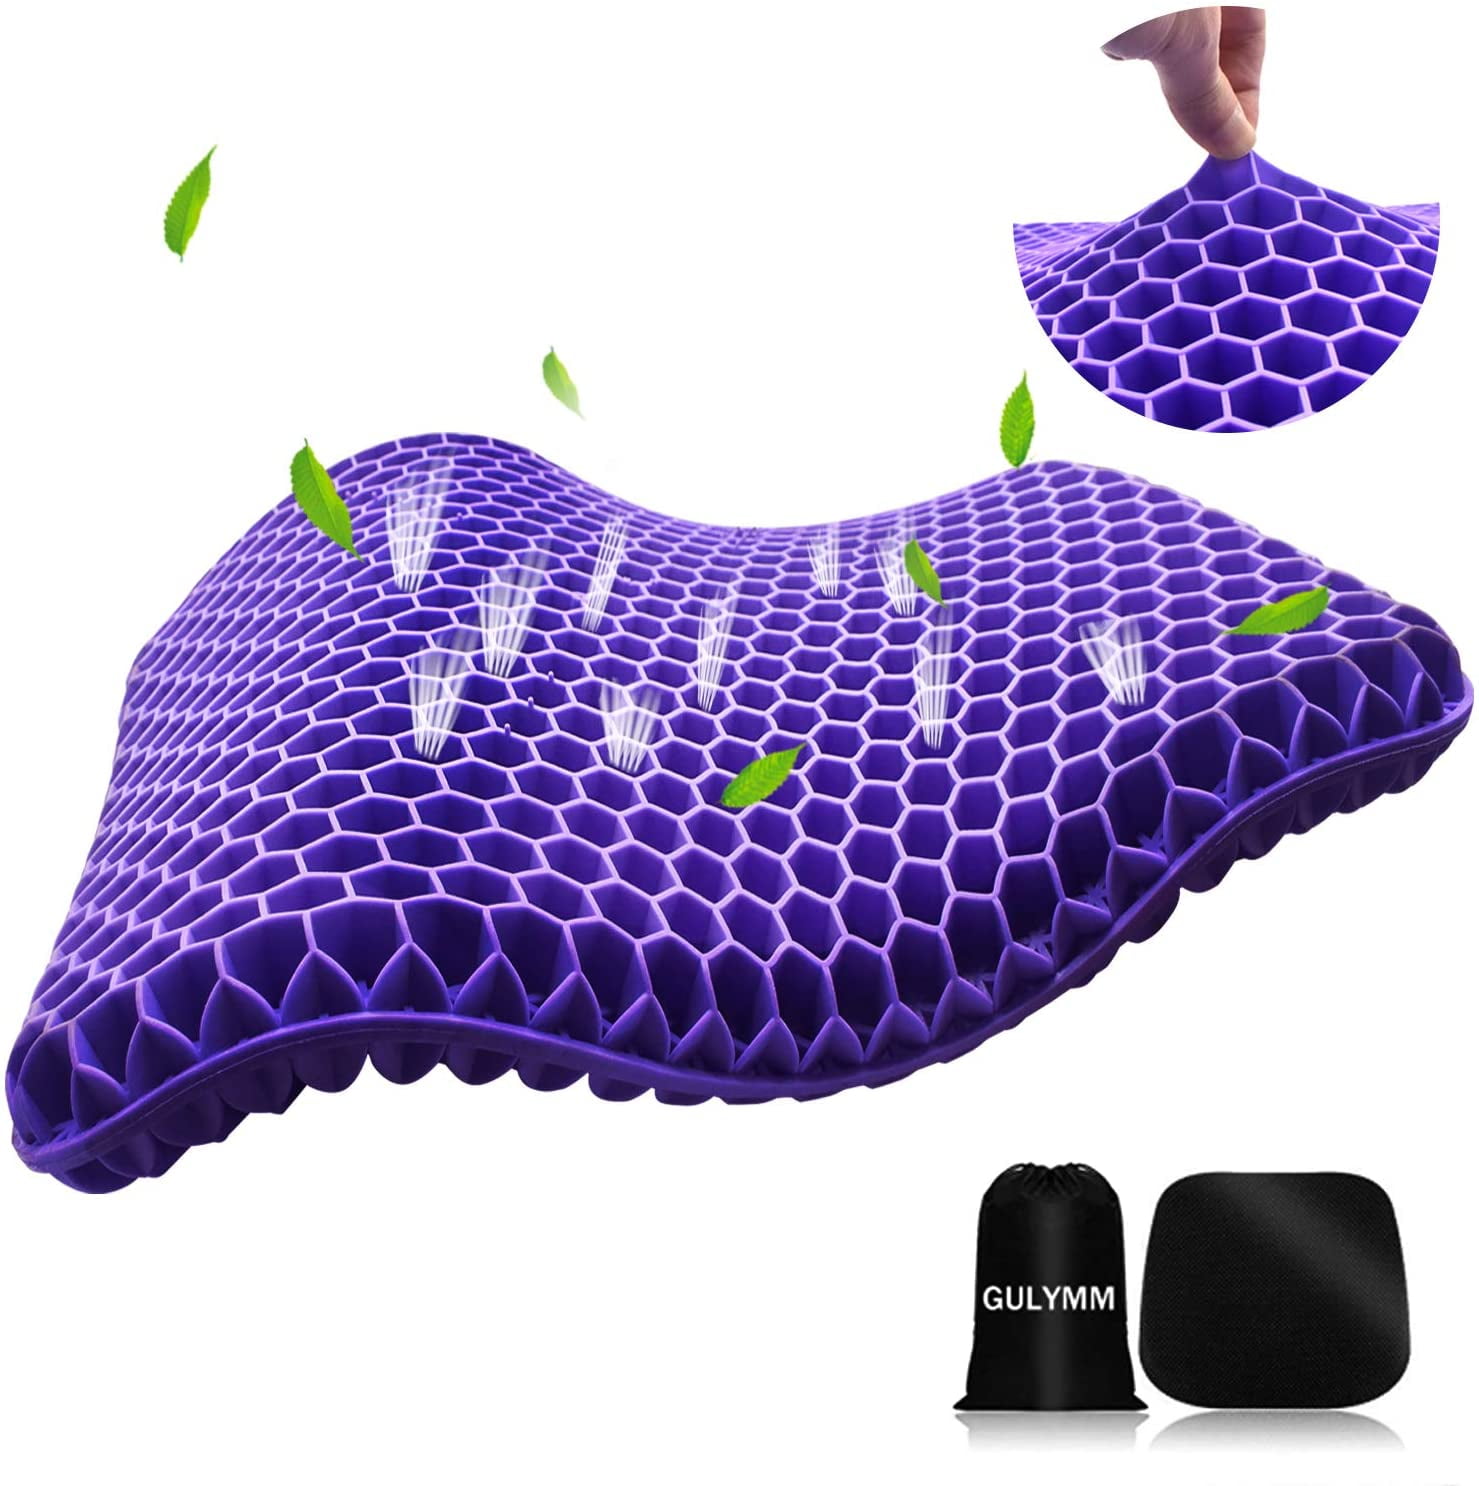 Purple Gel Seat Cushion Wheelchair Double Thick Egg Gel Cushion Long Sitting Pressure Relief Back Pain & Sciatica Pain Relief,Chair Cushion Chair Pads for Office Chair Car Seat 